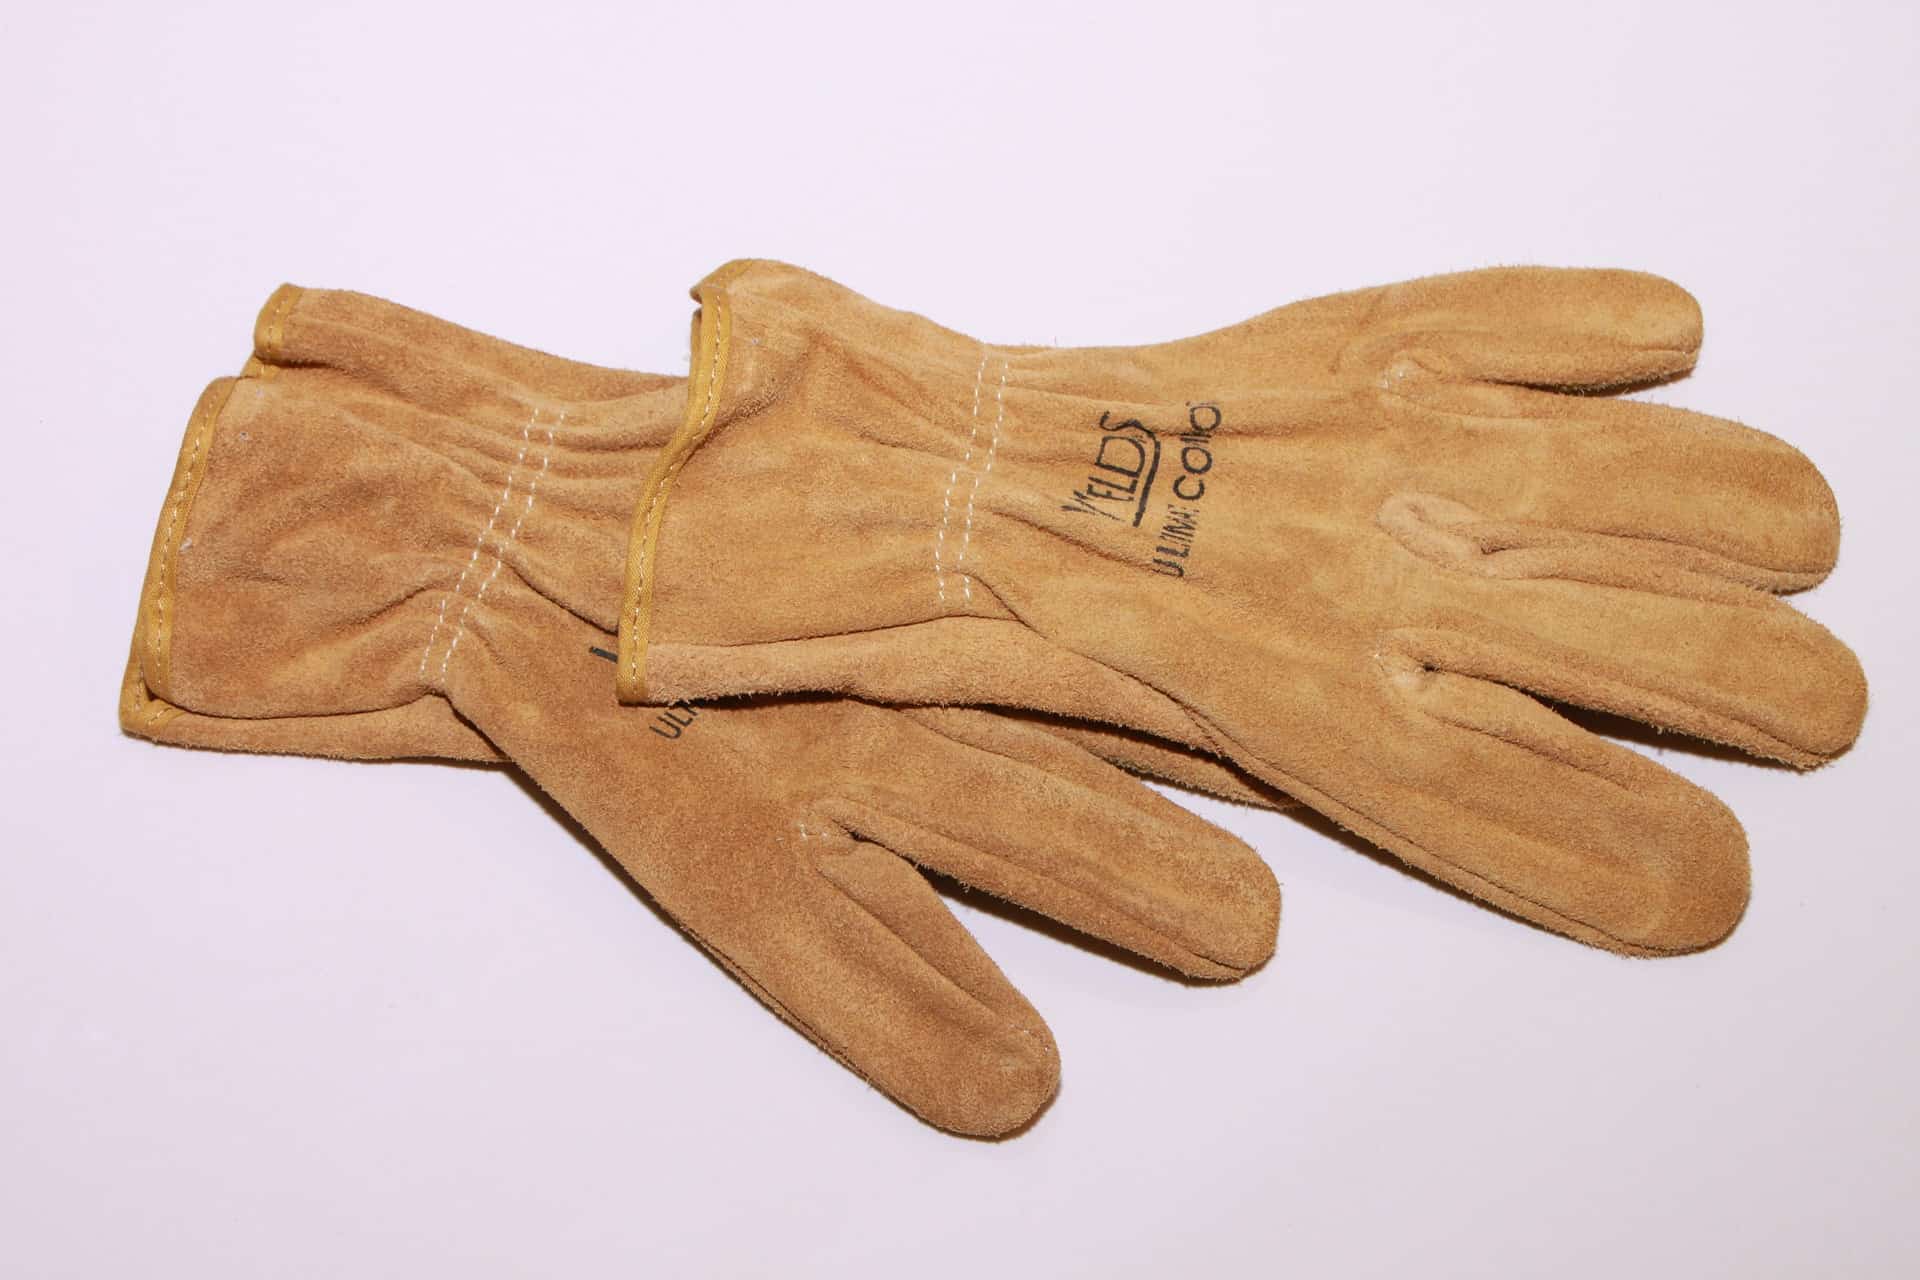 Revco 320 Comfort-Lined Cowhide High-Quality Stick Welding Gloves Size Large 